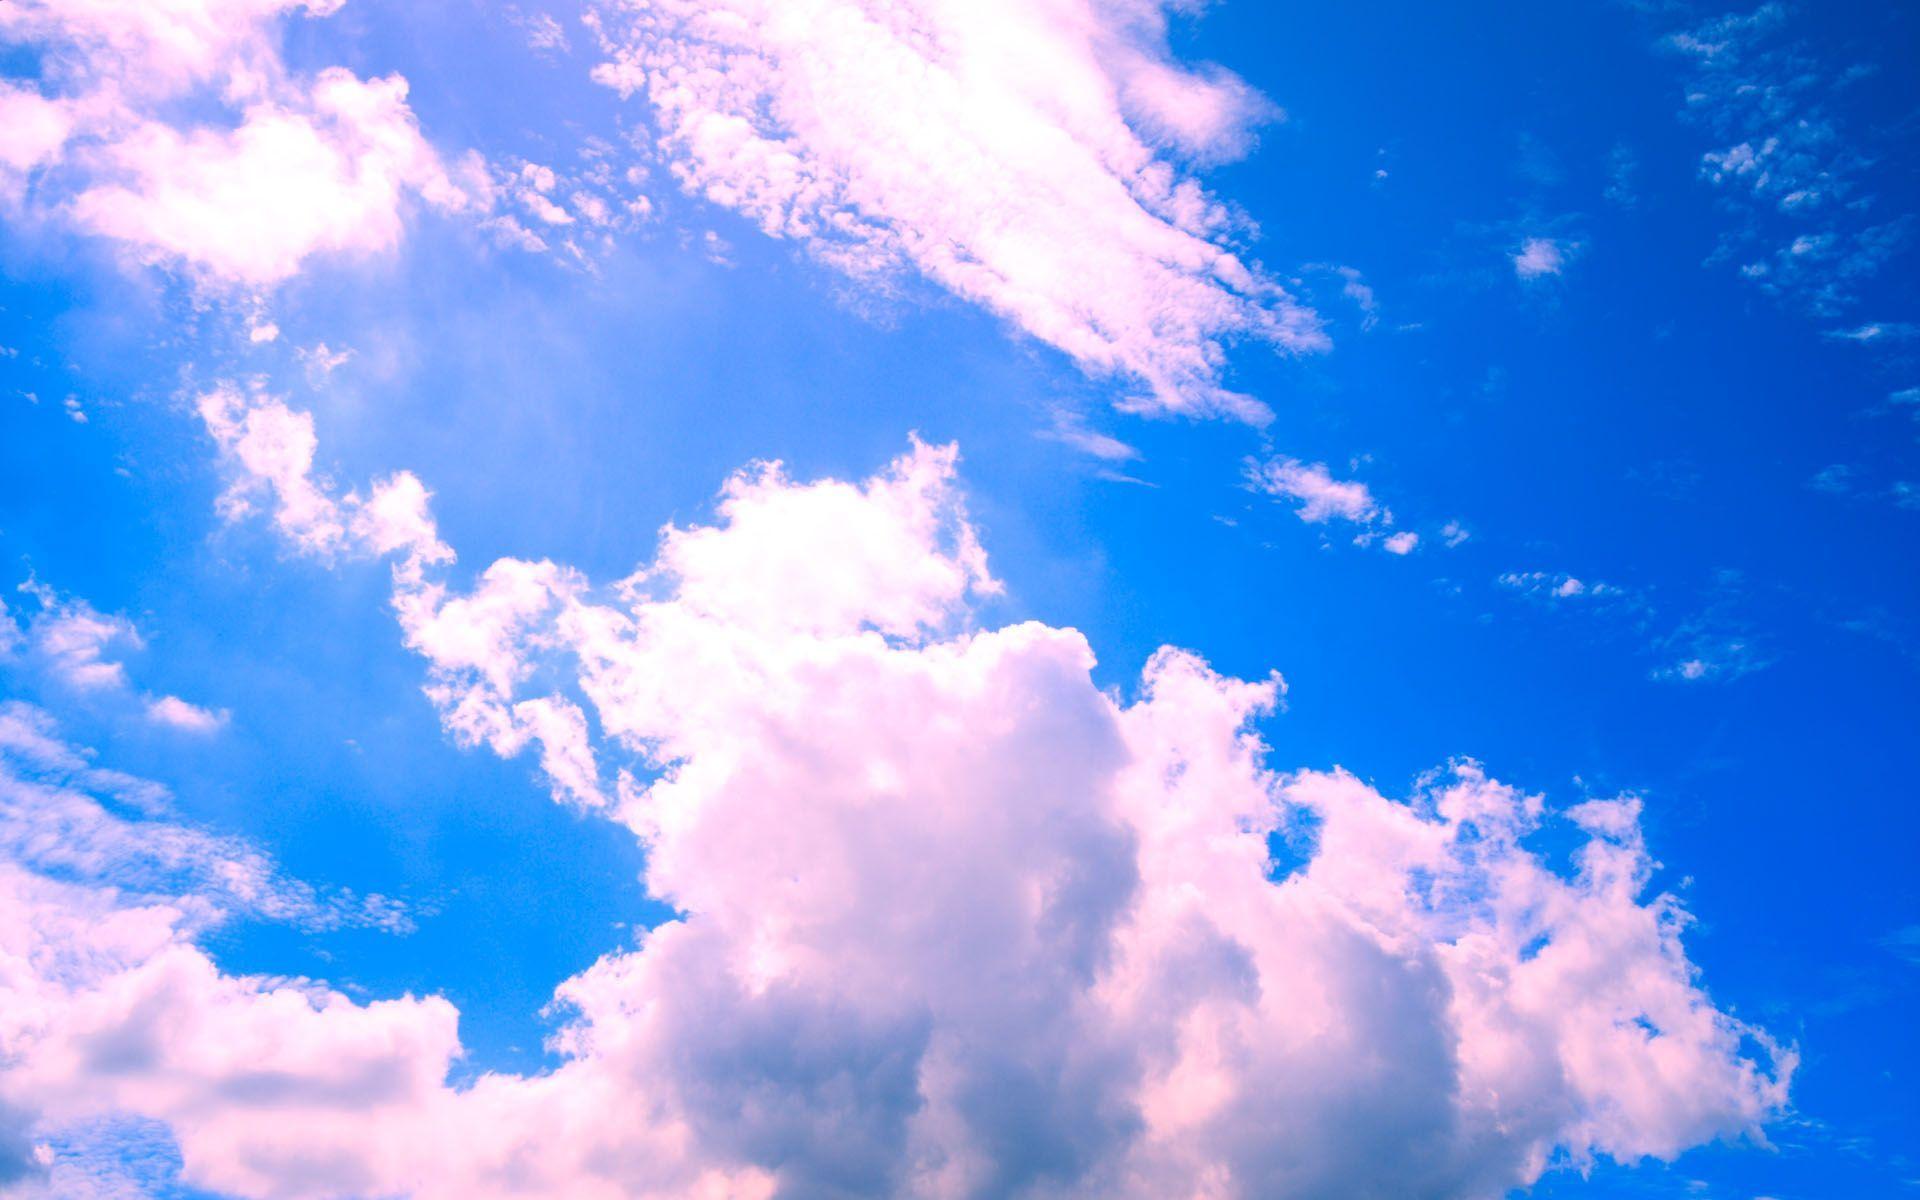 Aesthetic Sky Computer Wallpapers - Top Free Aesthetic Sky ...